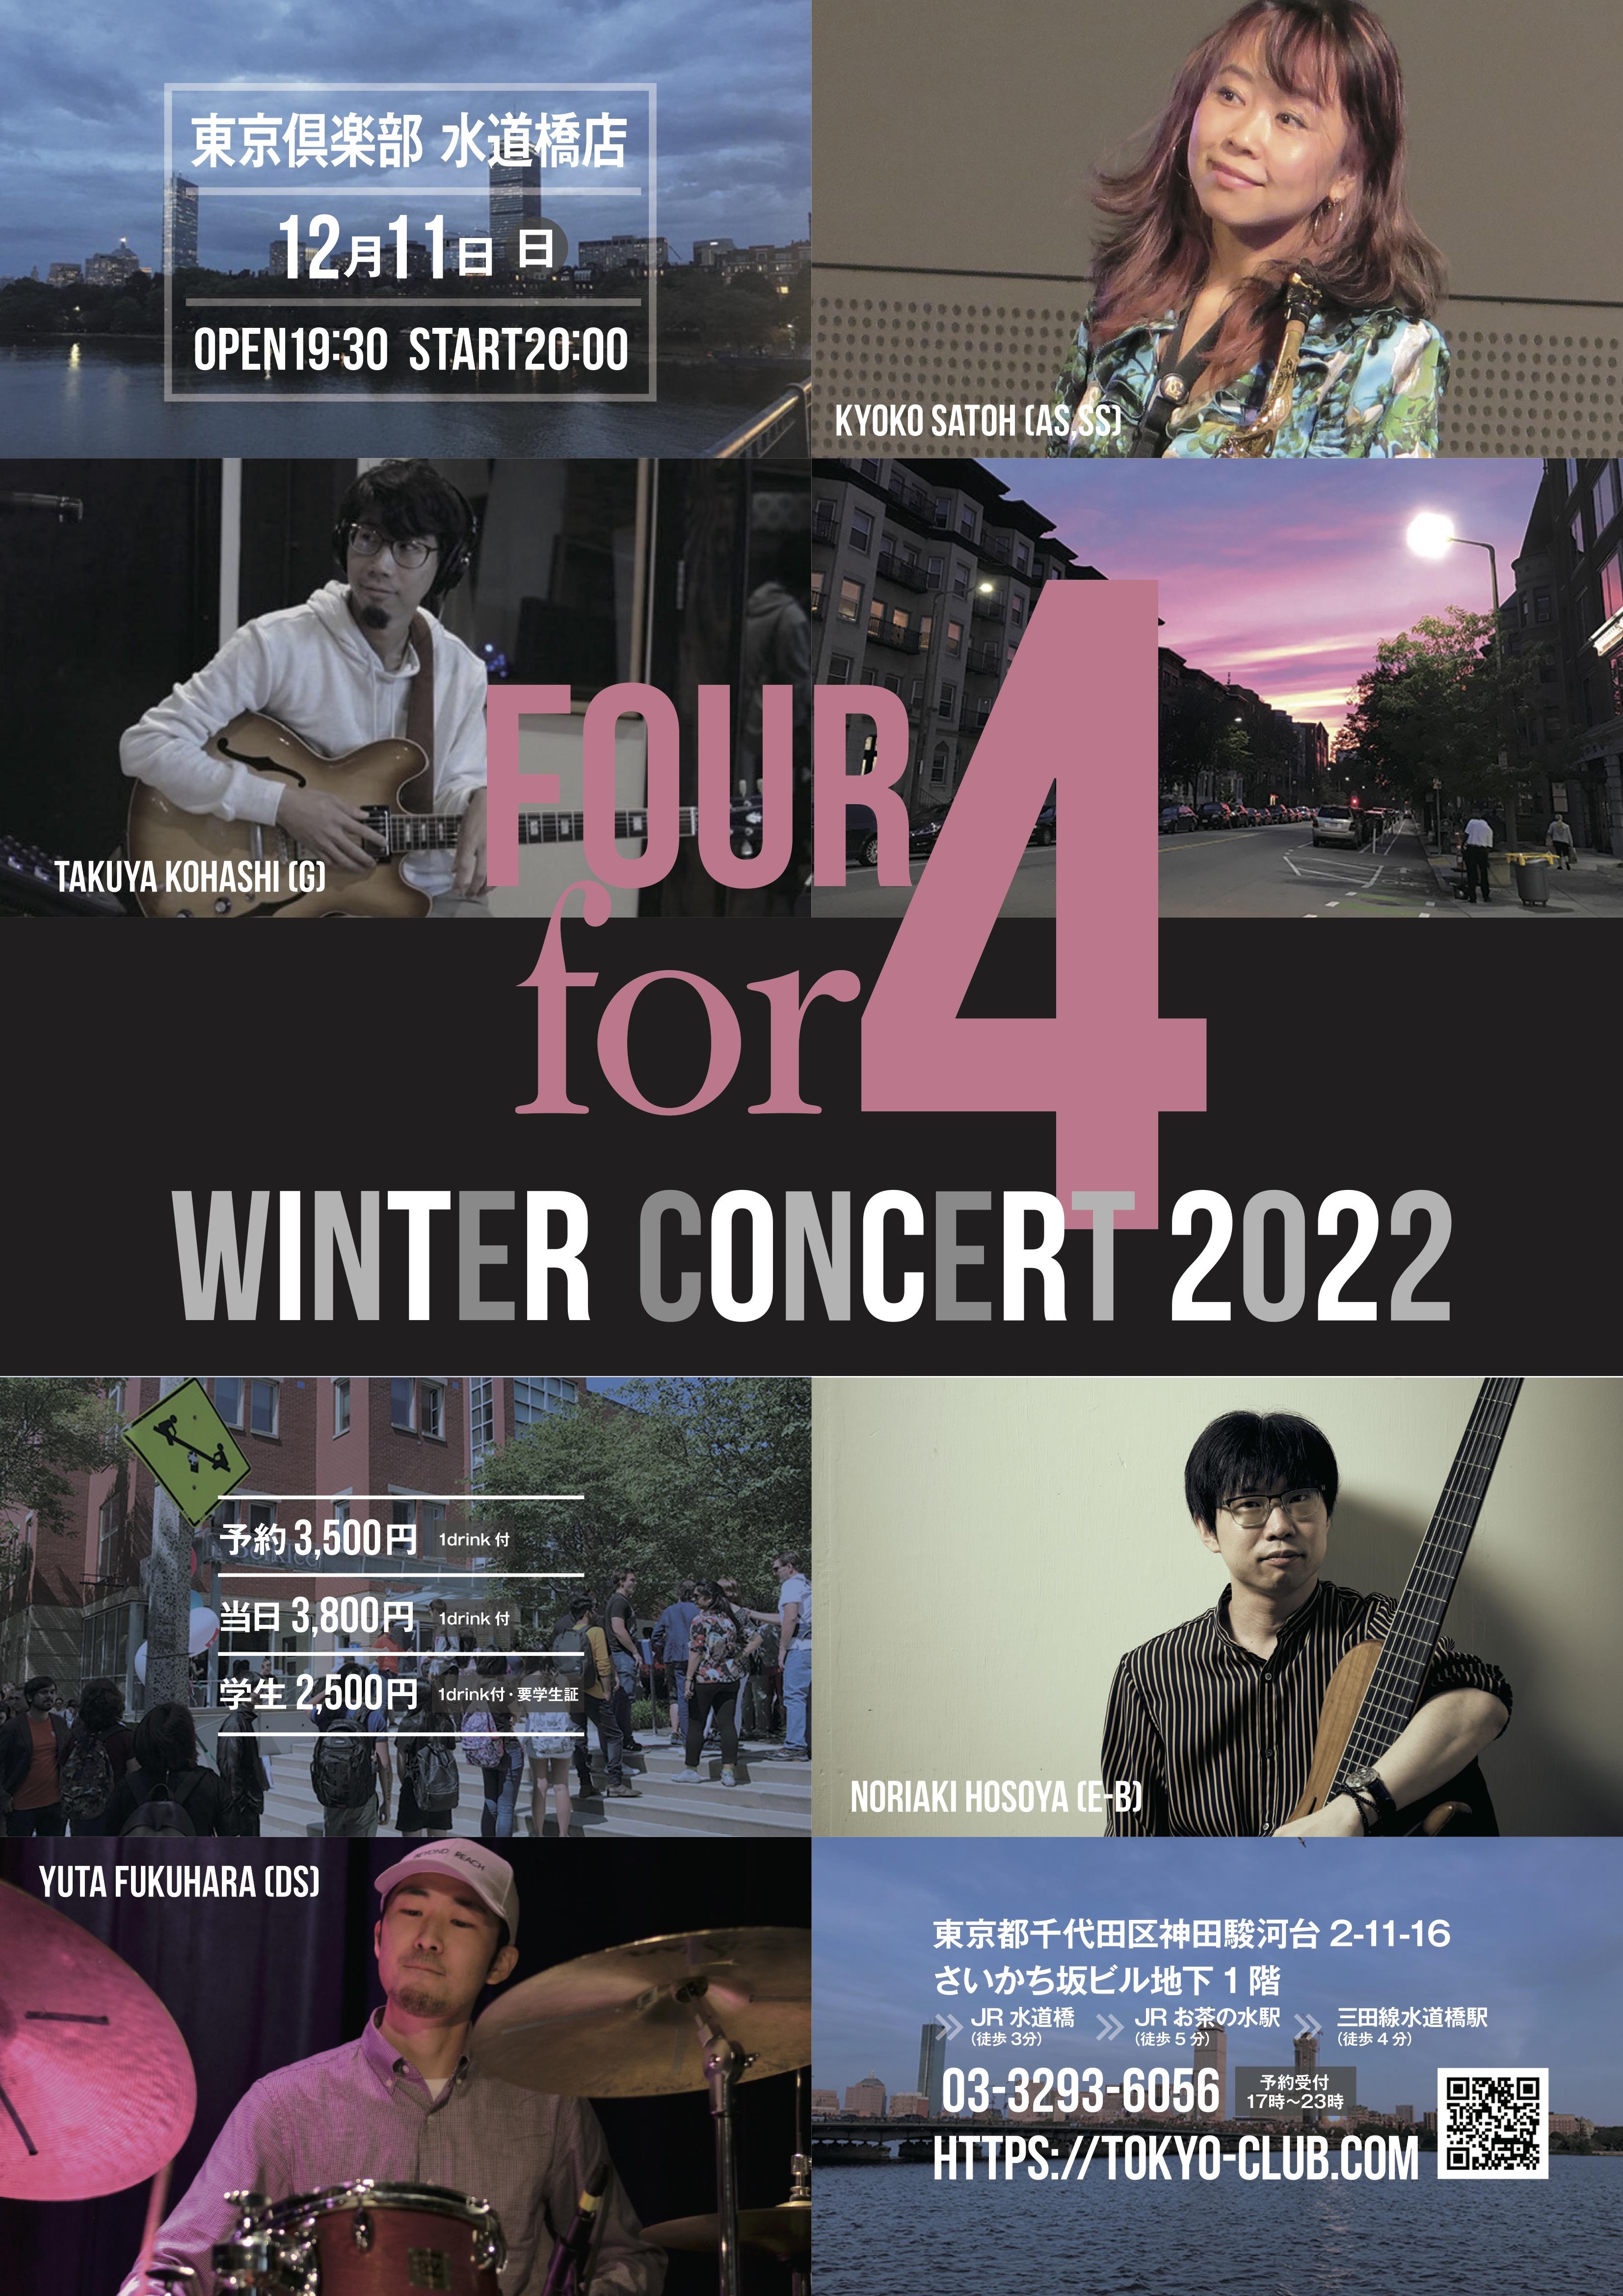 Four for 4 winter concert